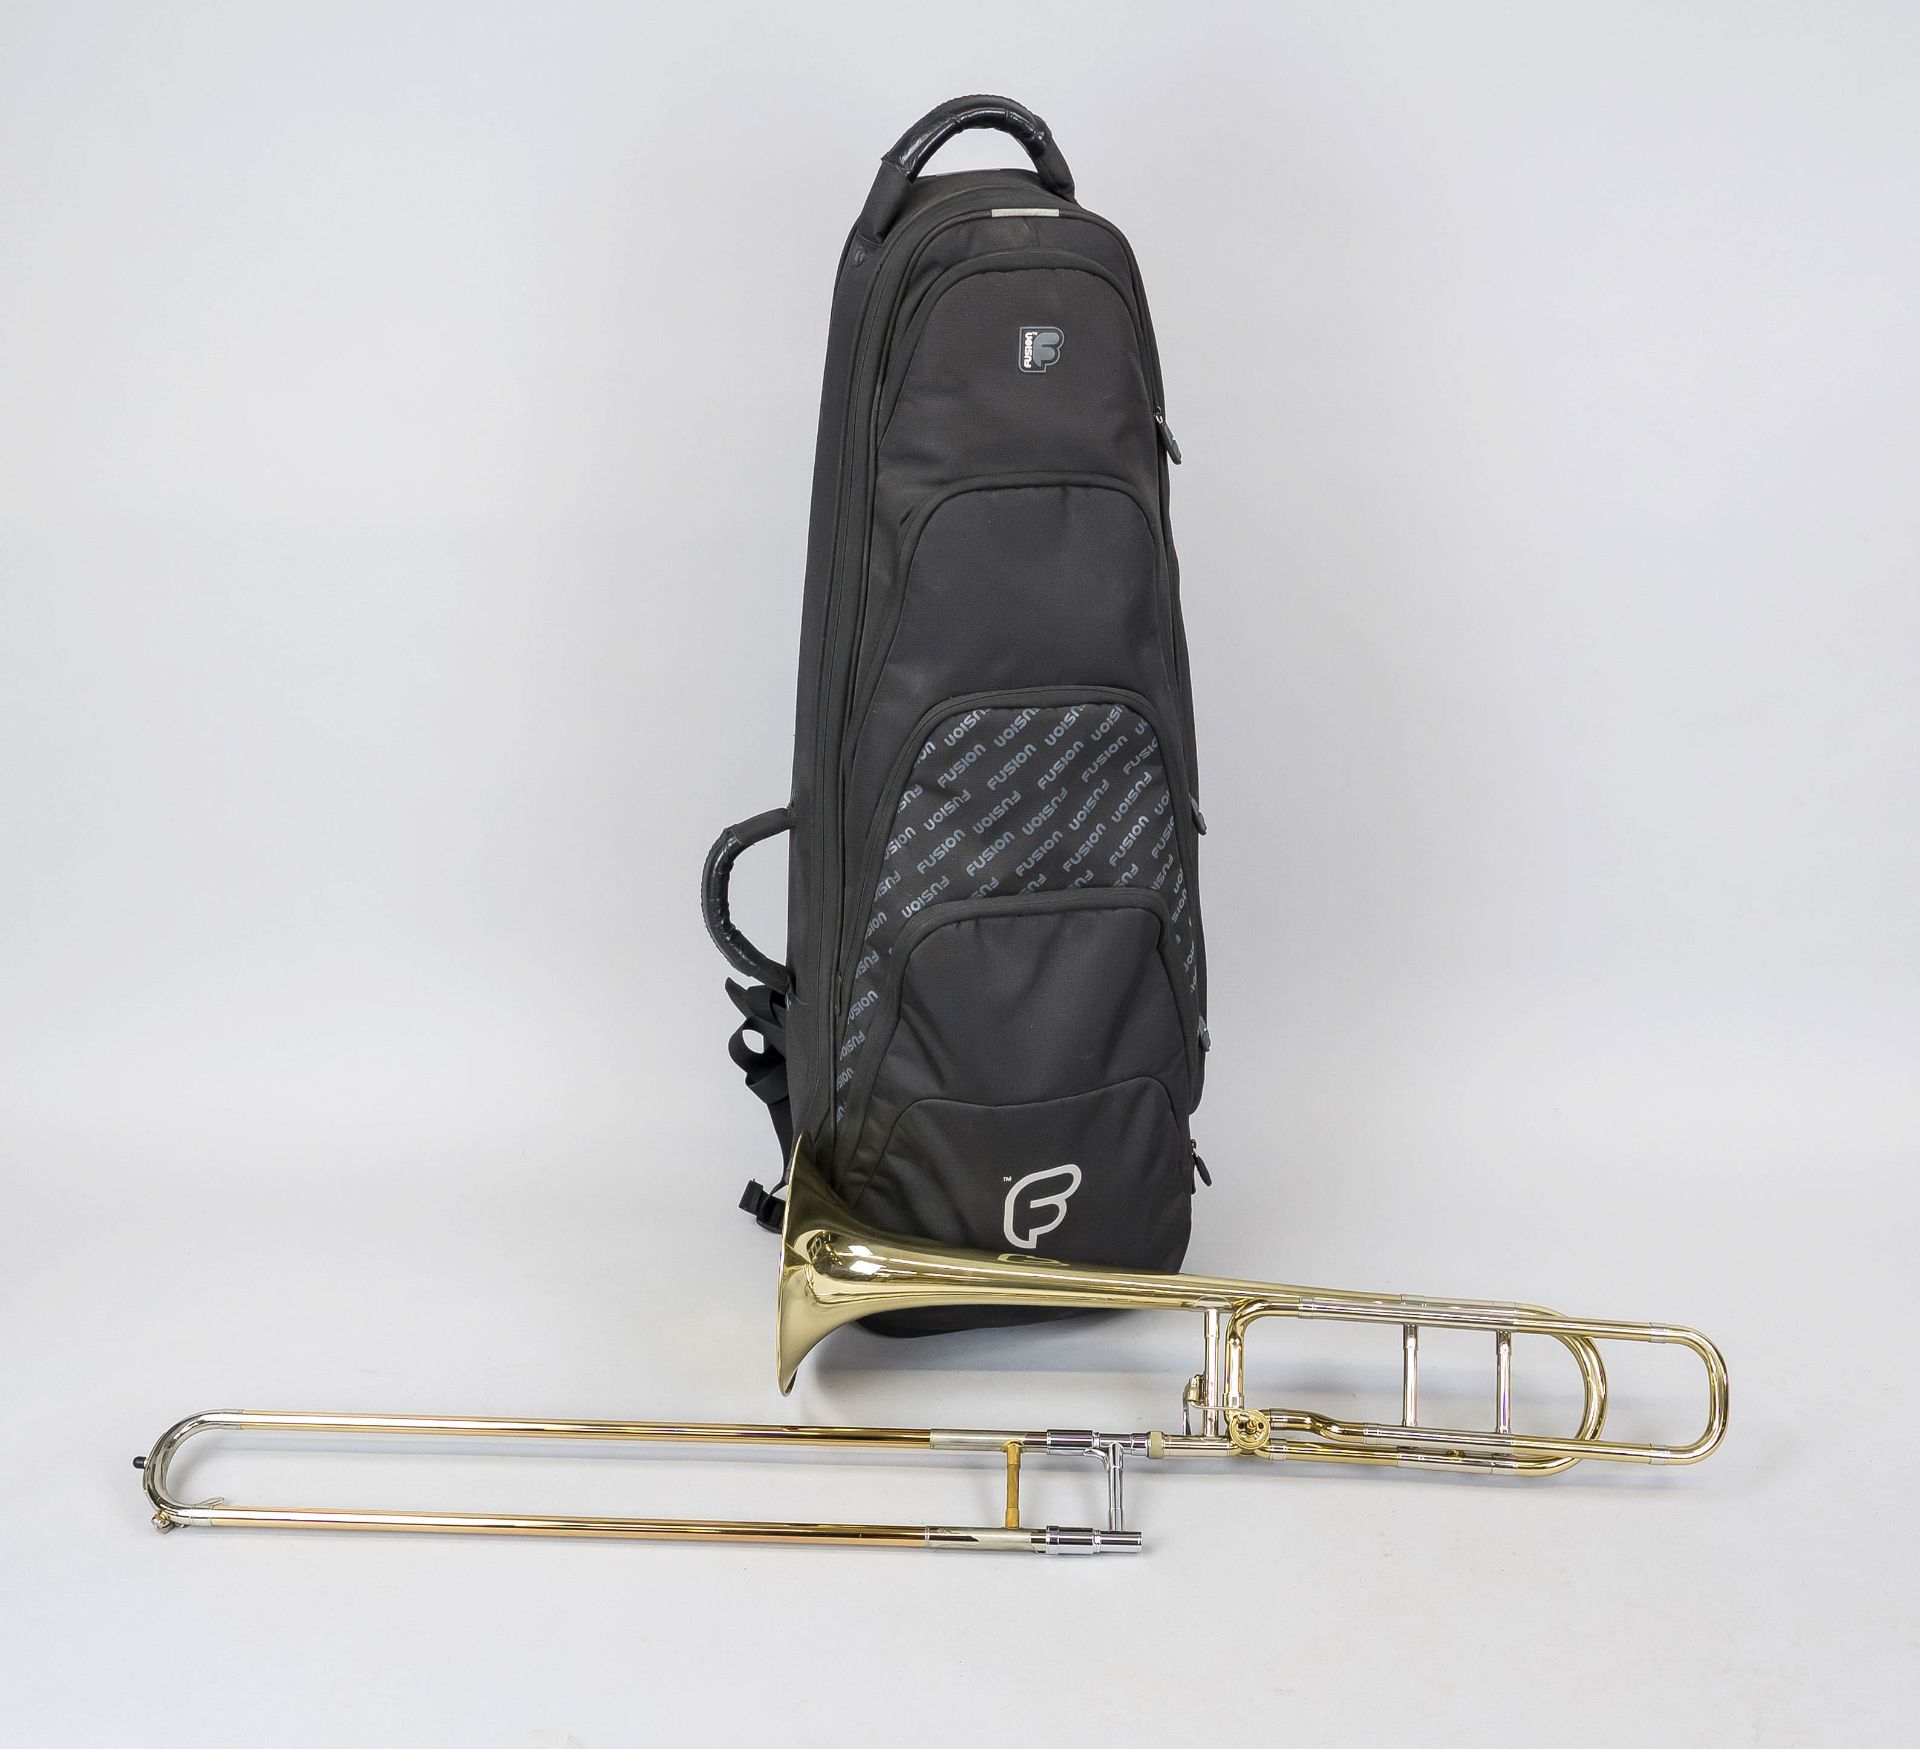 Trombone with bag, USA, 20th century, marked ''Blessing USA'' on the funnel. Mouthpiece by Yamaha (